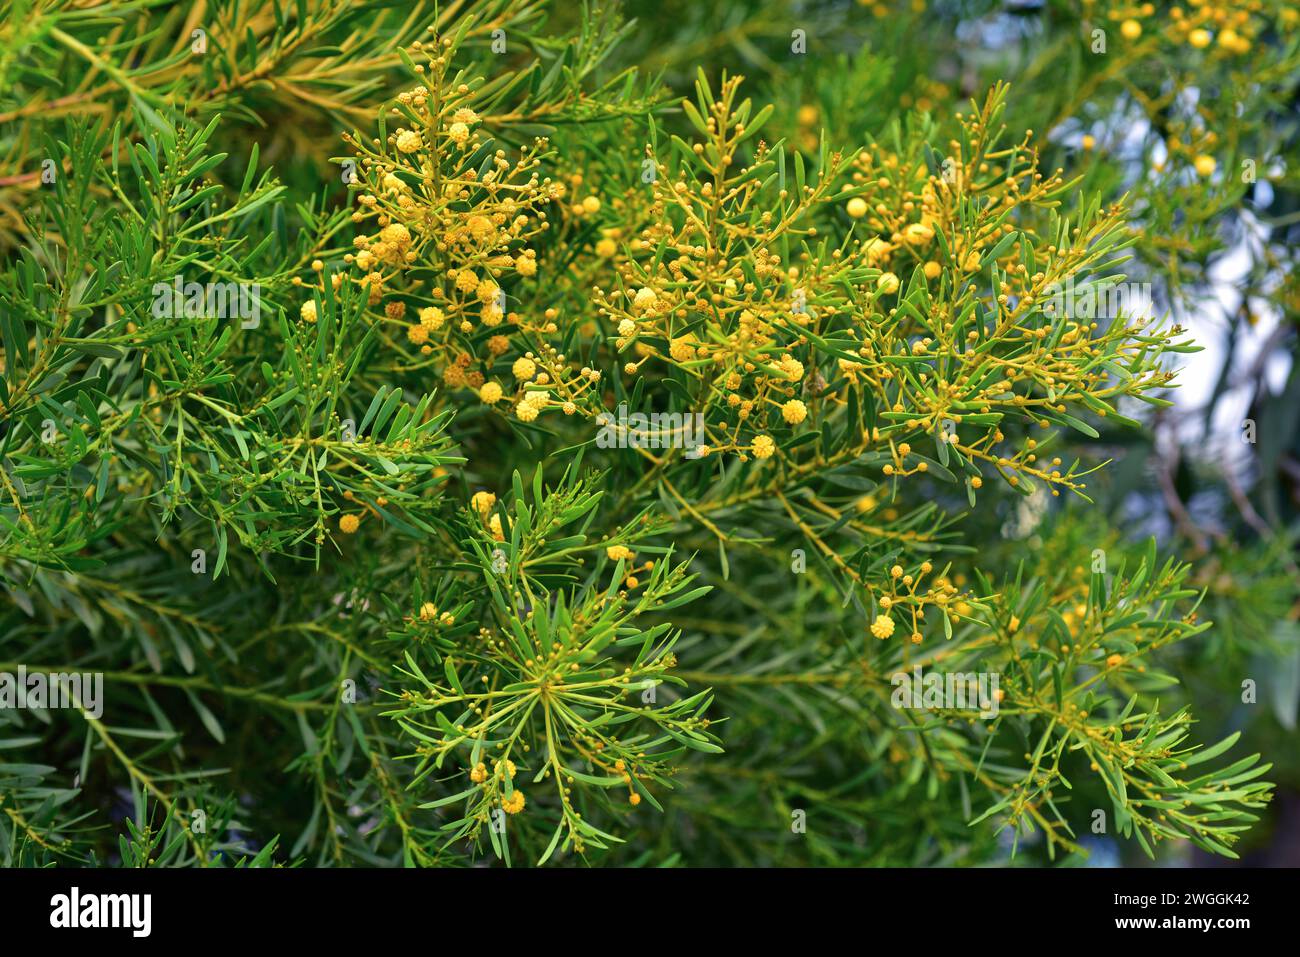 Port Lincoln wattle (Acacia anceps) is a big shrub native to southwestern Australia. Flowers and leaves detail. Stock Photo